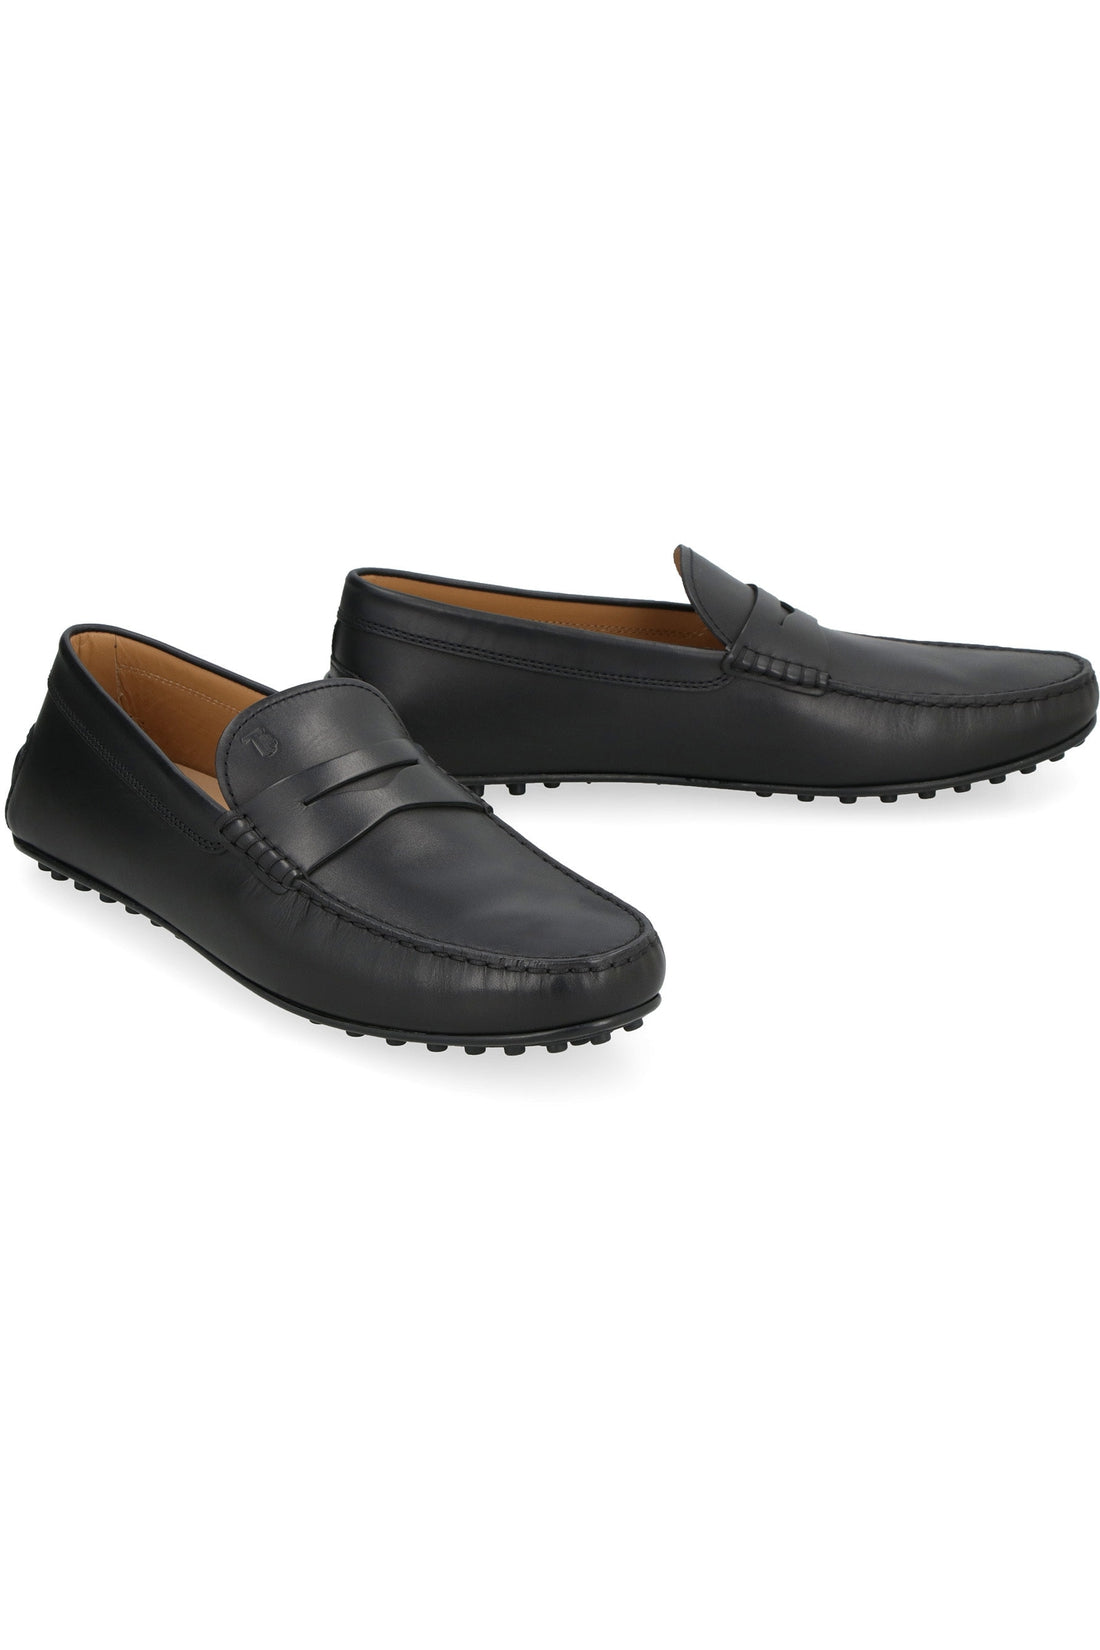 Tod's-OUTLET-SALE-City leather loafers-ARCHIVIST